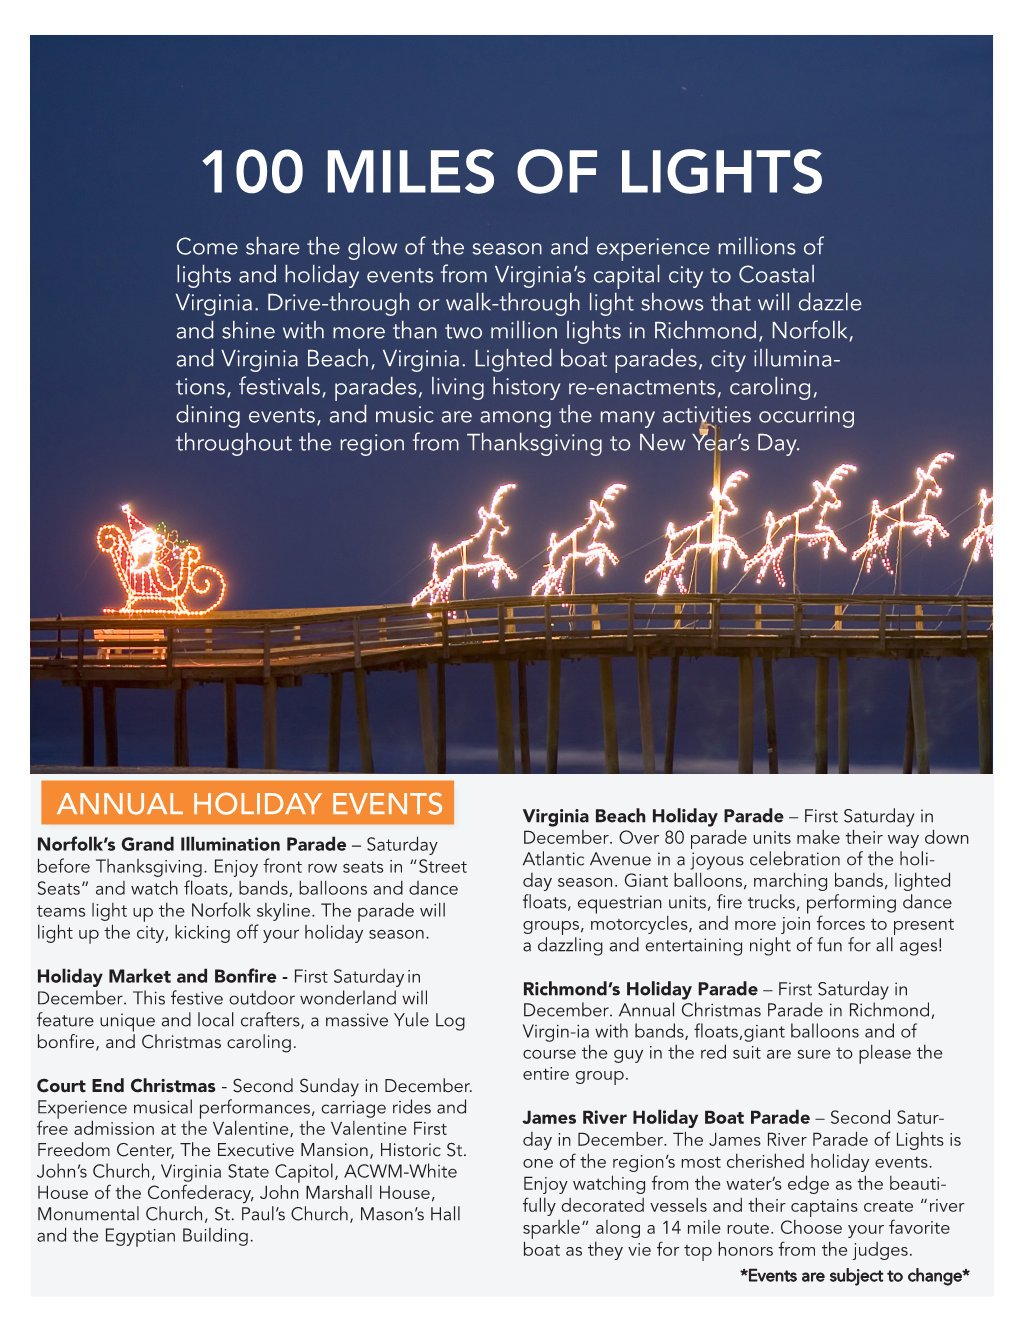 100 MILES of LIGHTS Come Share the Glow of the Season and Experience Millions of Lights and Holiday Events from Virginia’S Capital City to Coastal Virginia